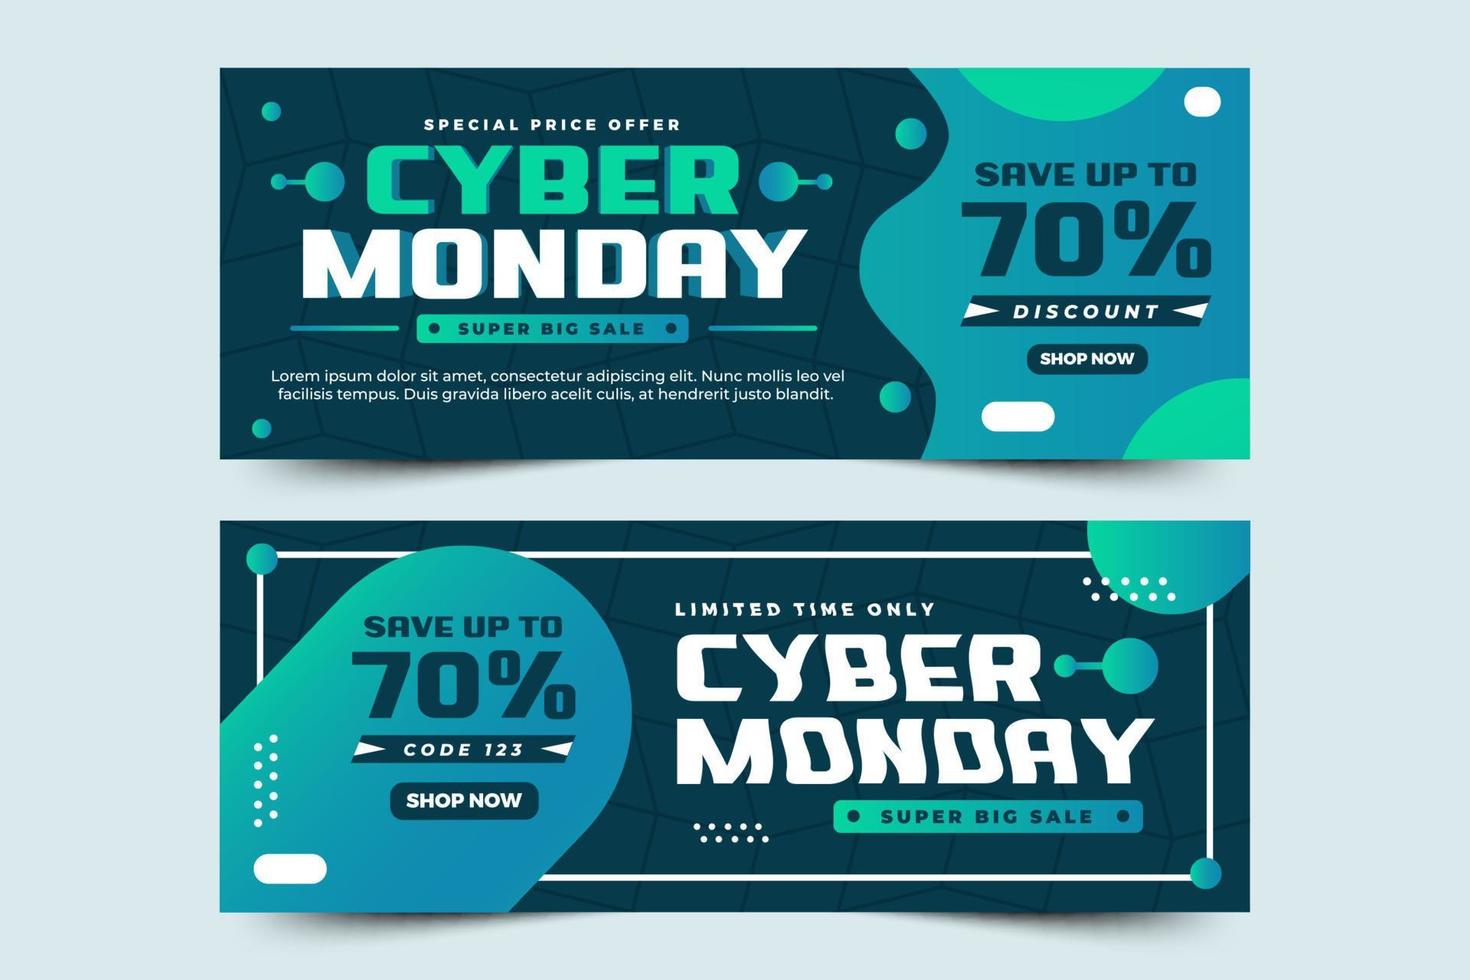 Cyber Monday facebook cover banner design template is easy to customize vector